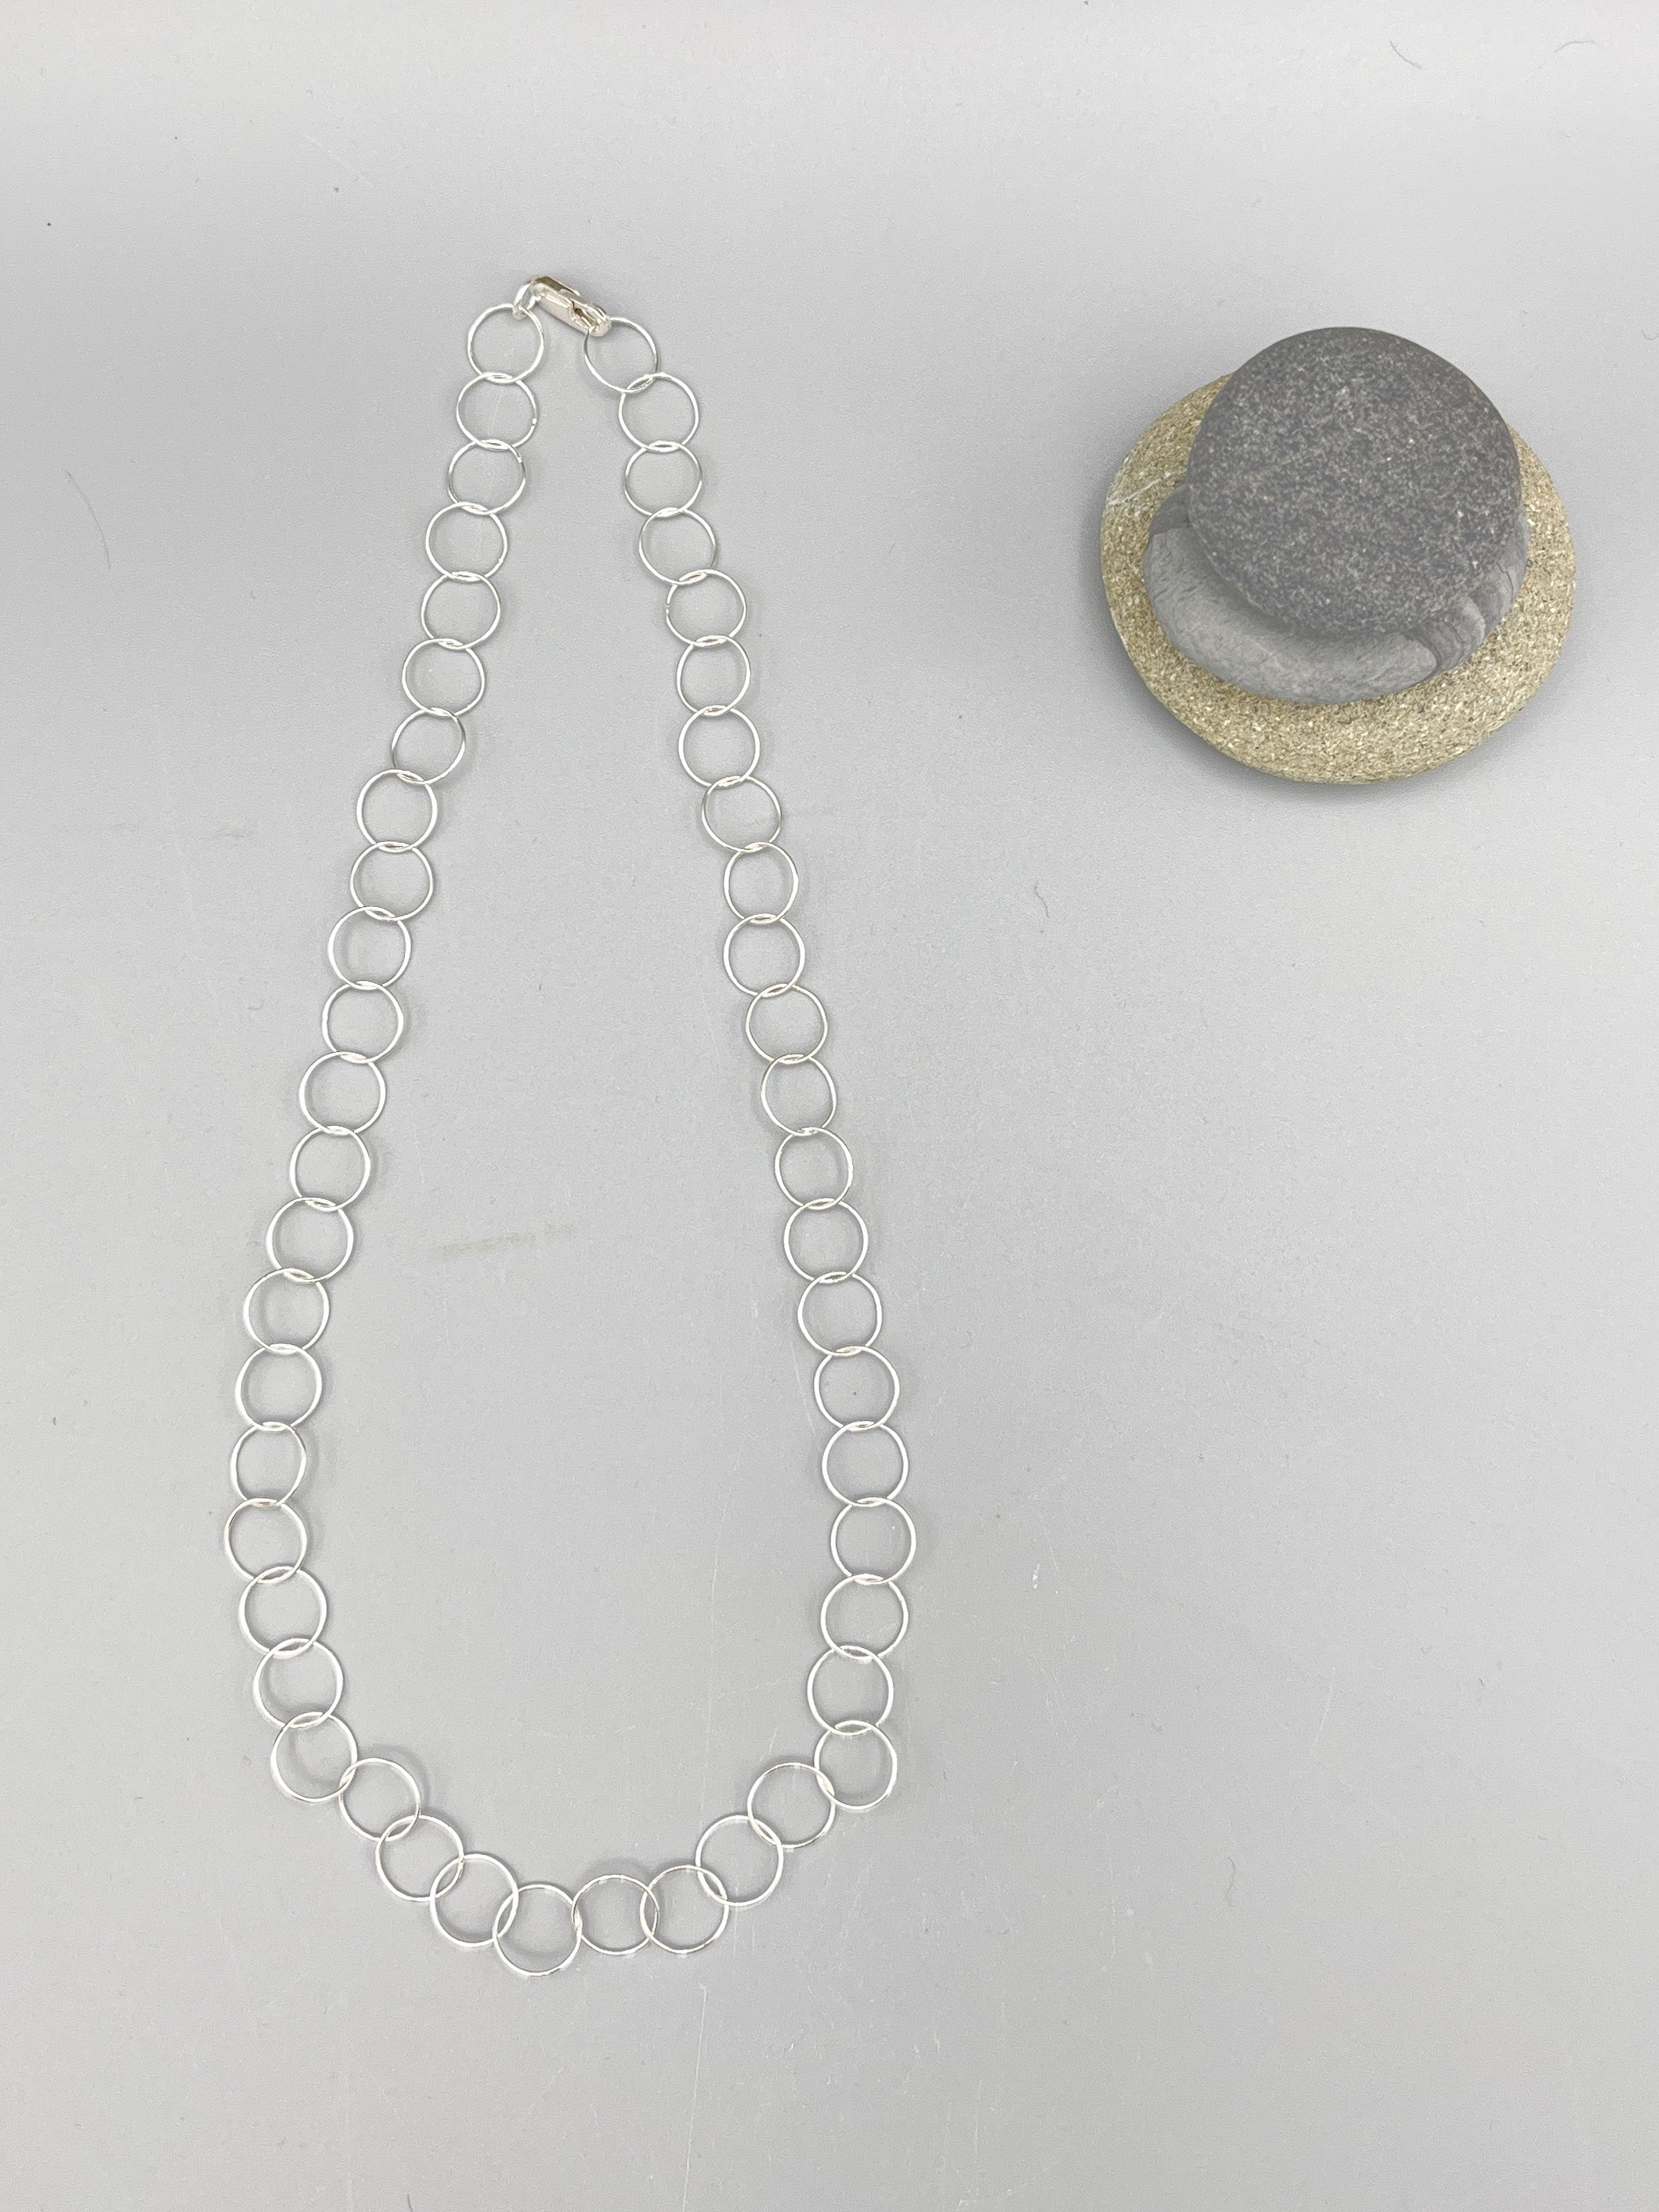 Sterling Silver Necklace. 18” (45 cm) long polished round ring link necklace